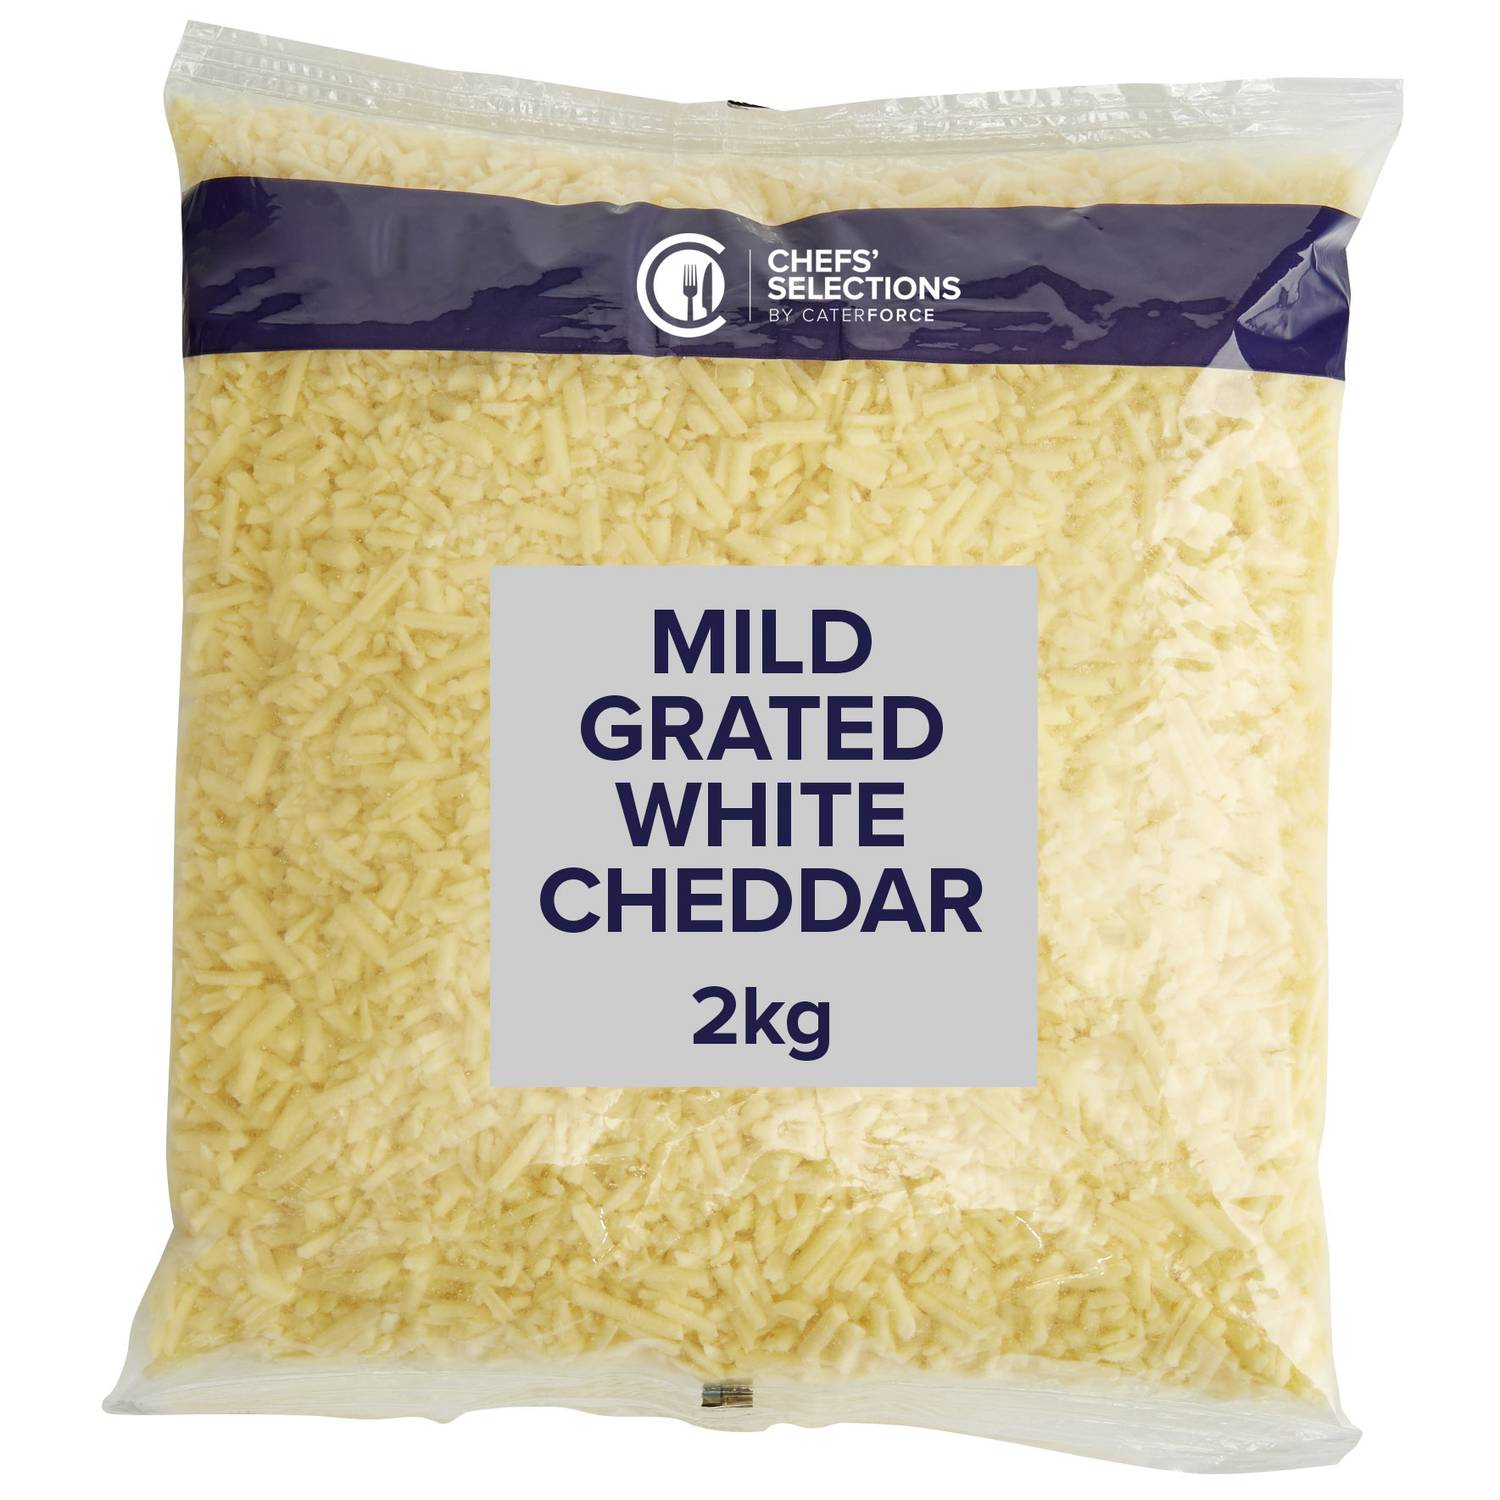 Chefs’ Selections Grated White Mild Cheddar (6 x 2kg)